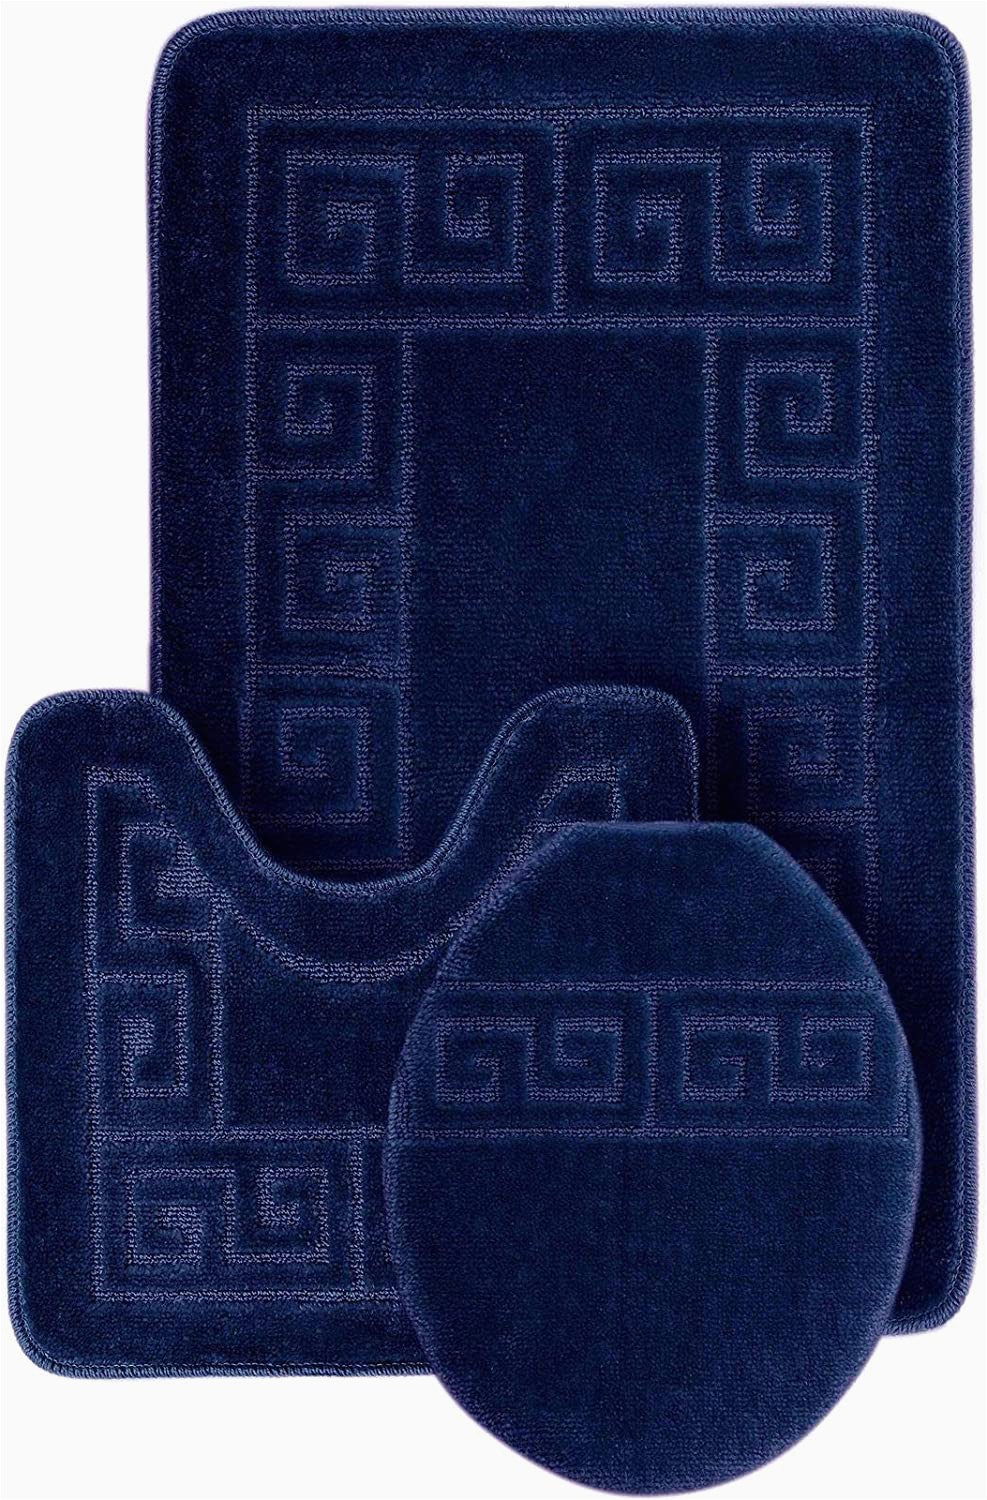 Bath Rug Sets with Elongated Lid Cover Wpm World Products Mart Bathroom Rugs Set 3 Piece Bath Pattern Rug 20"x32" Contour Mats 20"x20" with Lid Cover Navy